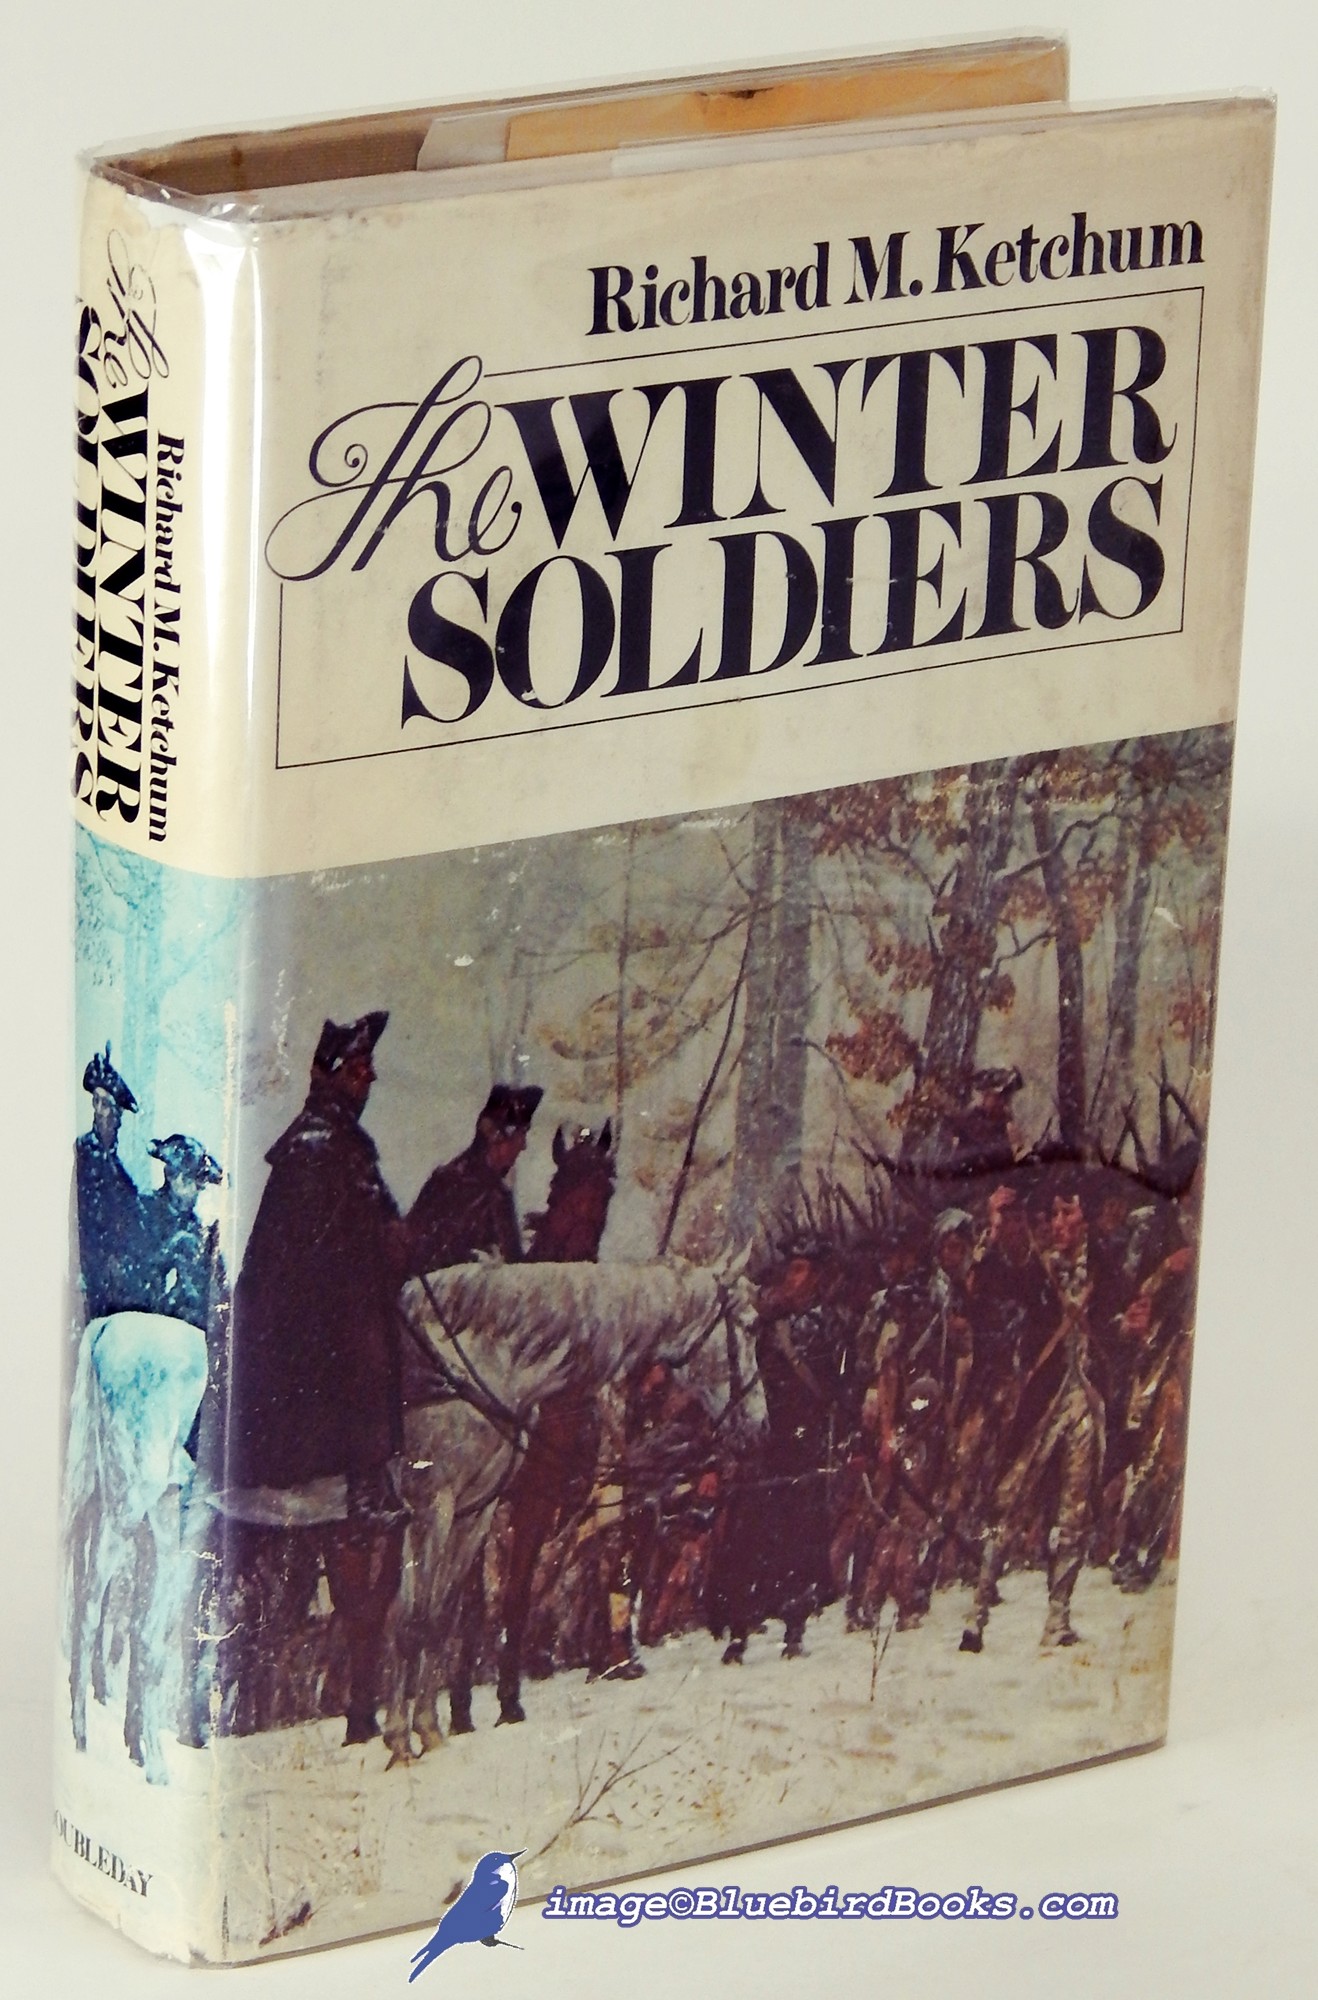 KETCHUM, RICHARD M. - The Winter Soldiers